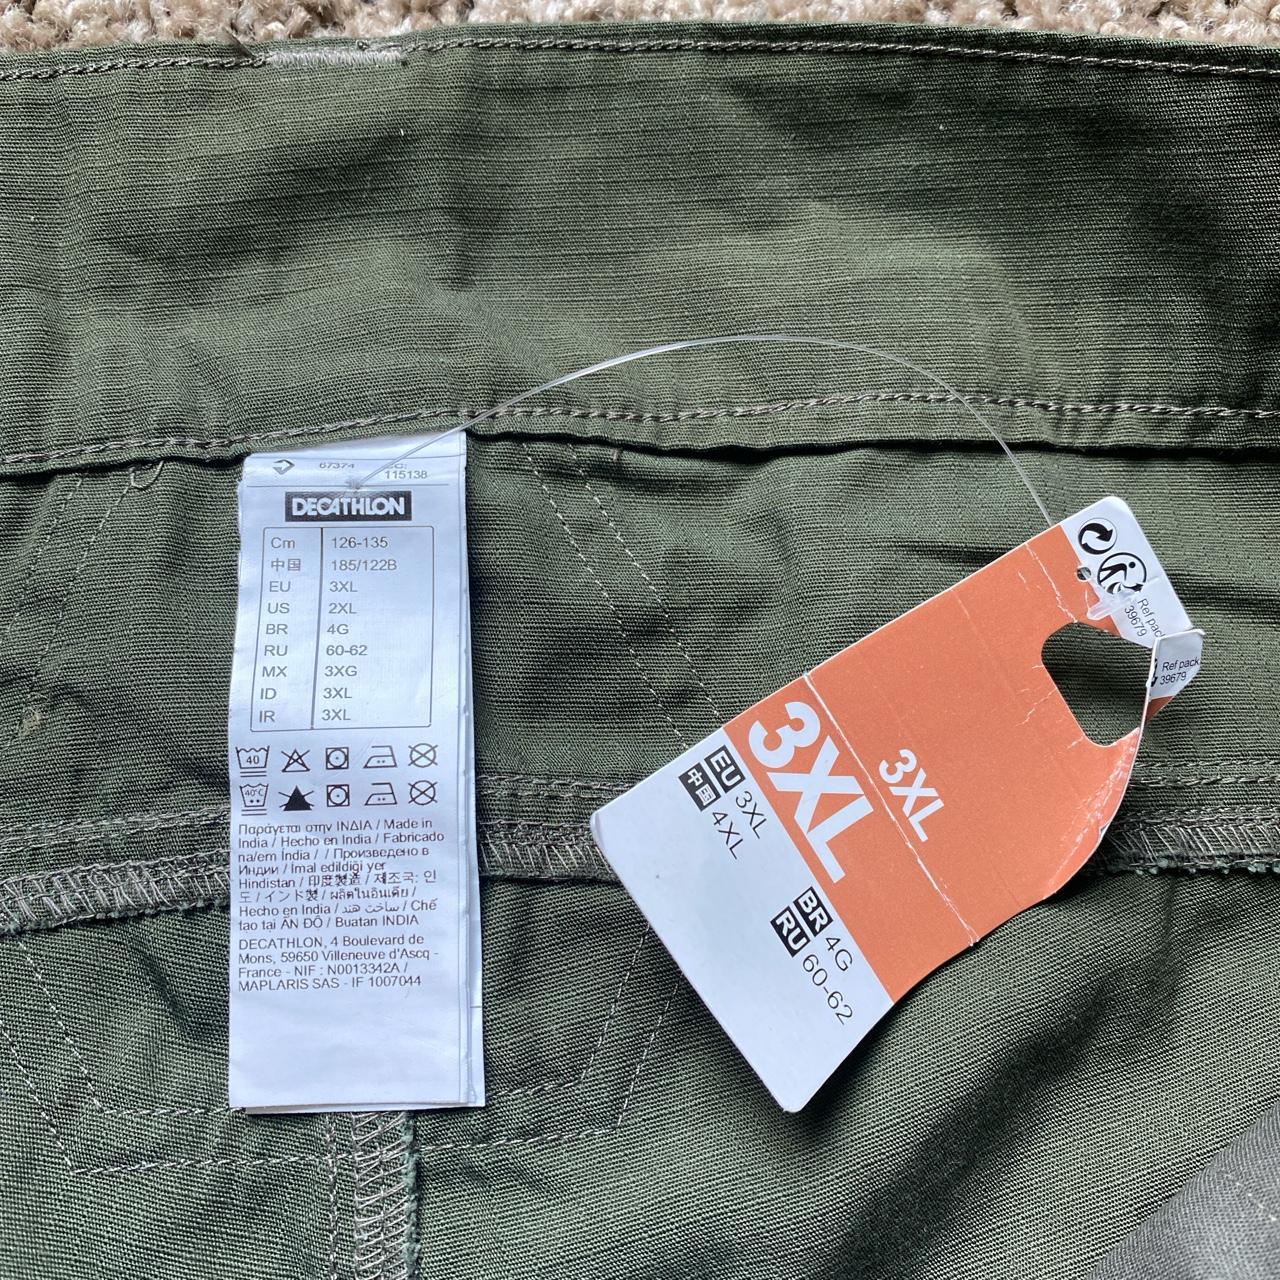 Product Image 3 - Army green Cargo Pants❤️‍🔥

These are